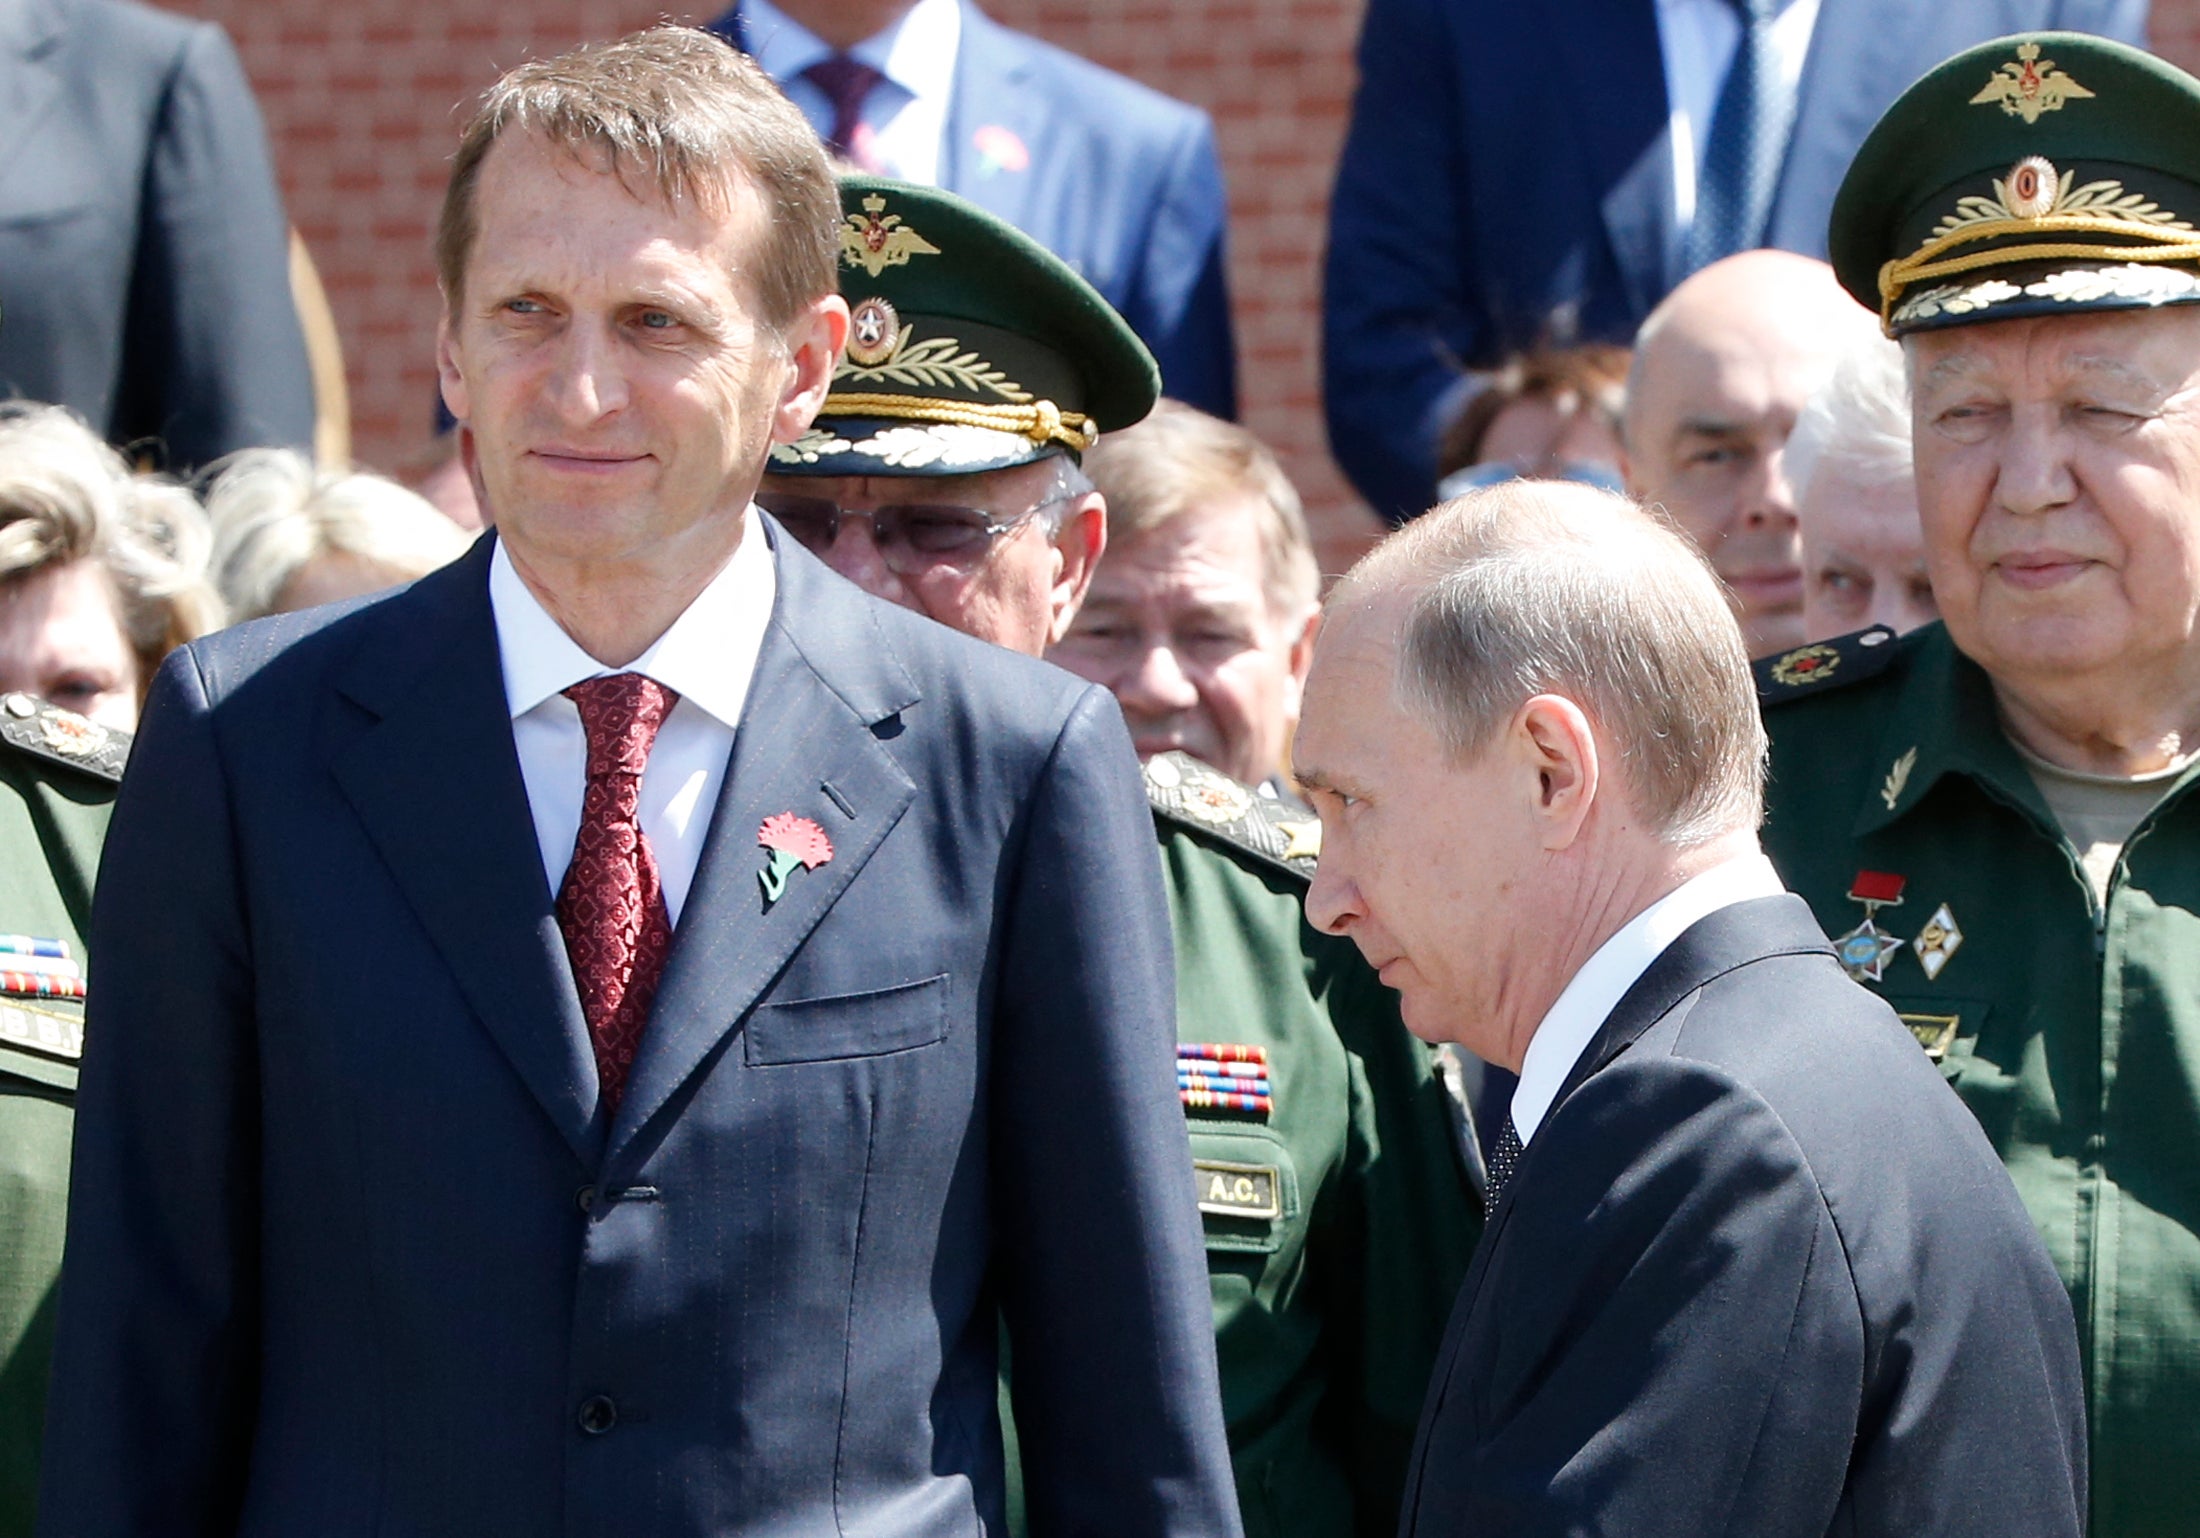 Sergey Naryshkin, then-State Duma Speaker and now head of the SVR foreign intelligence service, with Vladimir Putin at a wreath-laying ceremony in Moscow in 2016